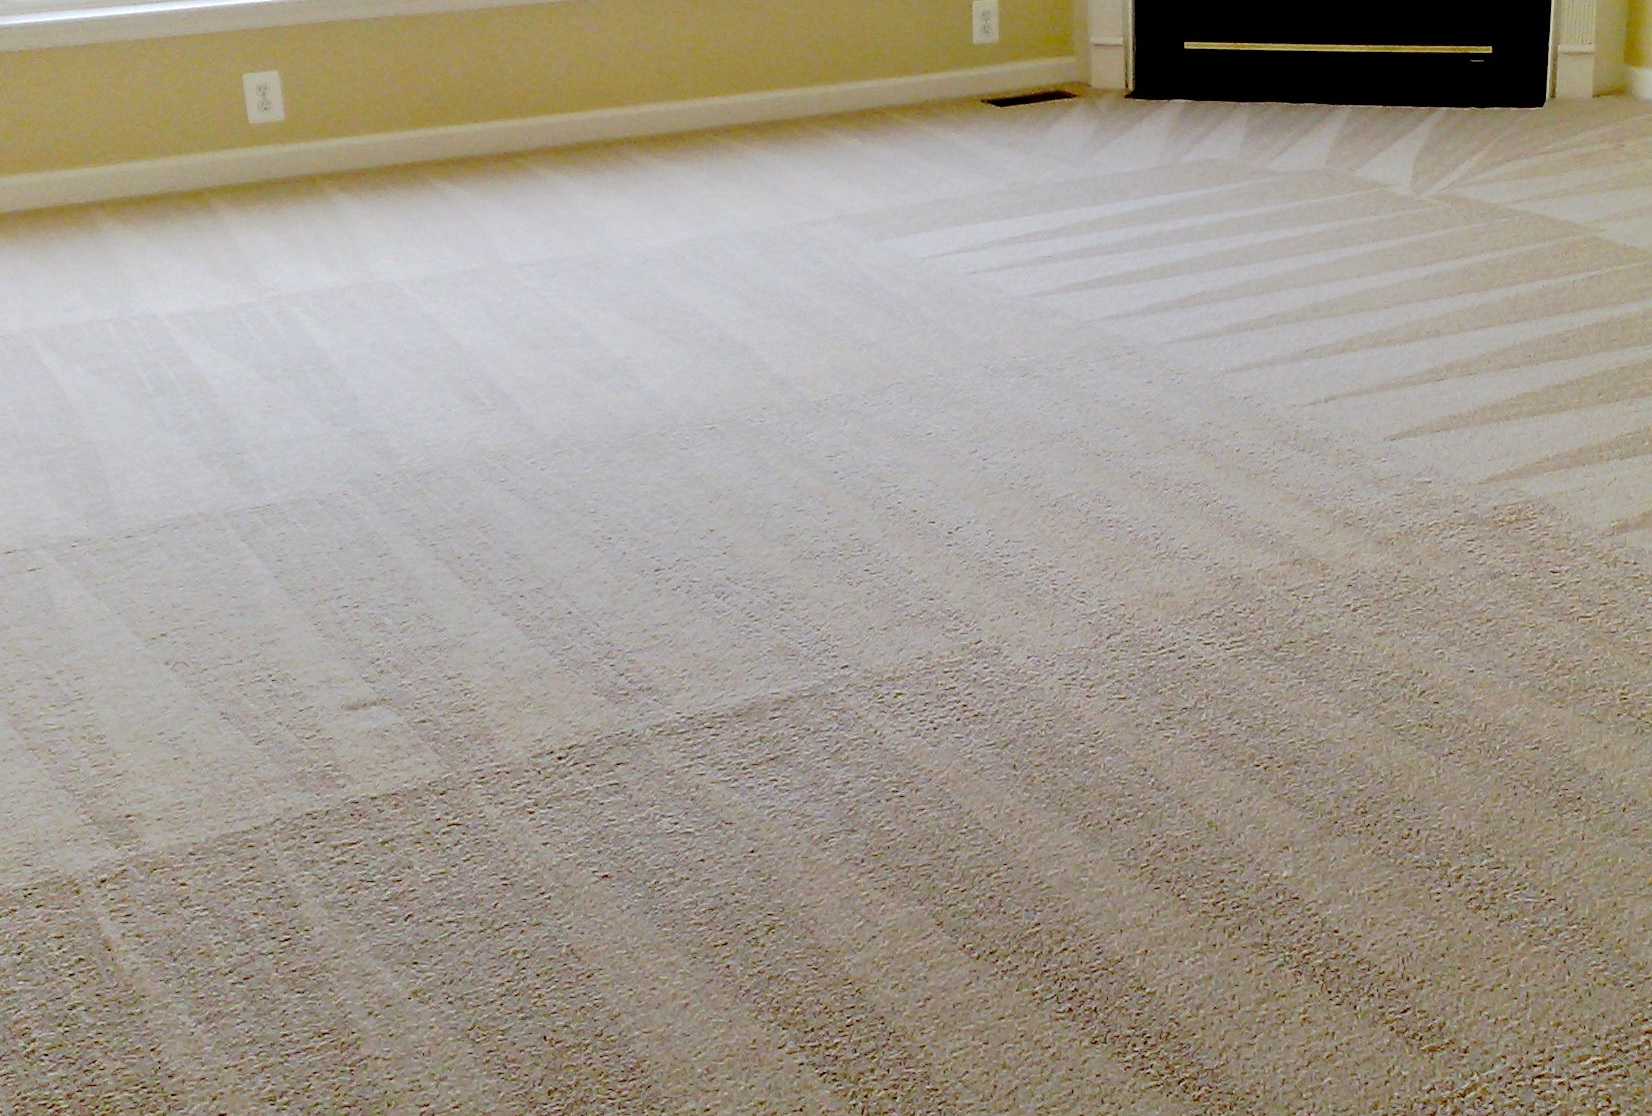 Tracked Down Stains On Rugs! Get In Touch With Us We Will Do It Right.